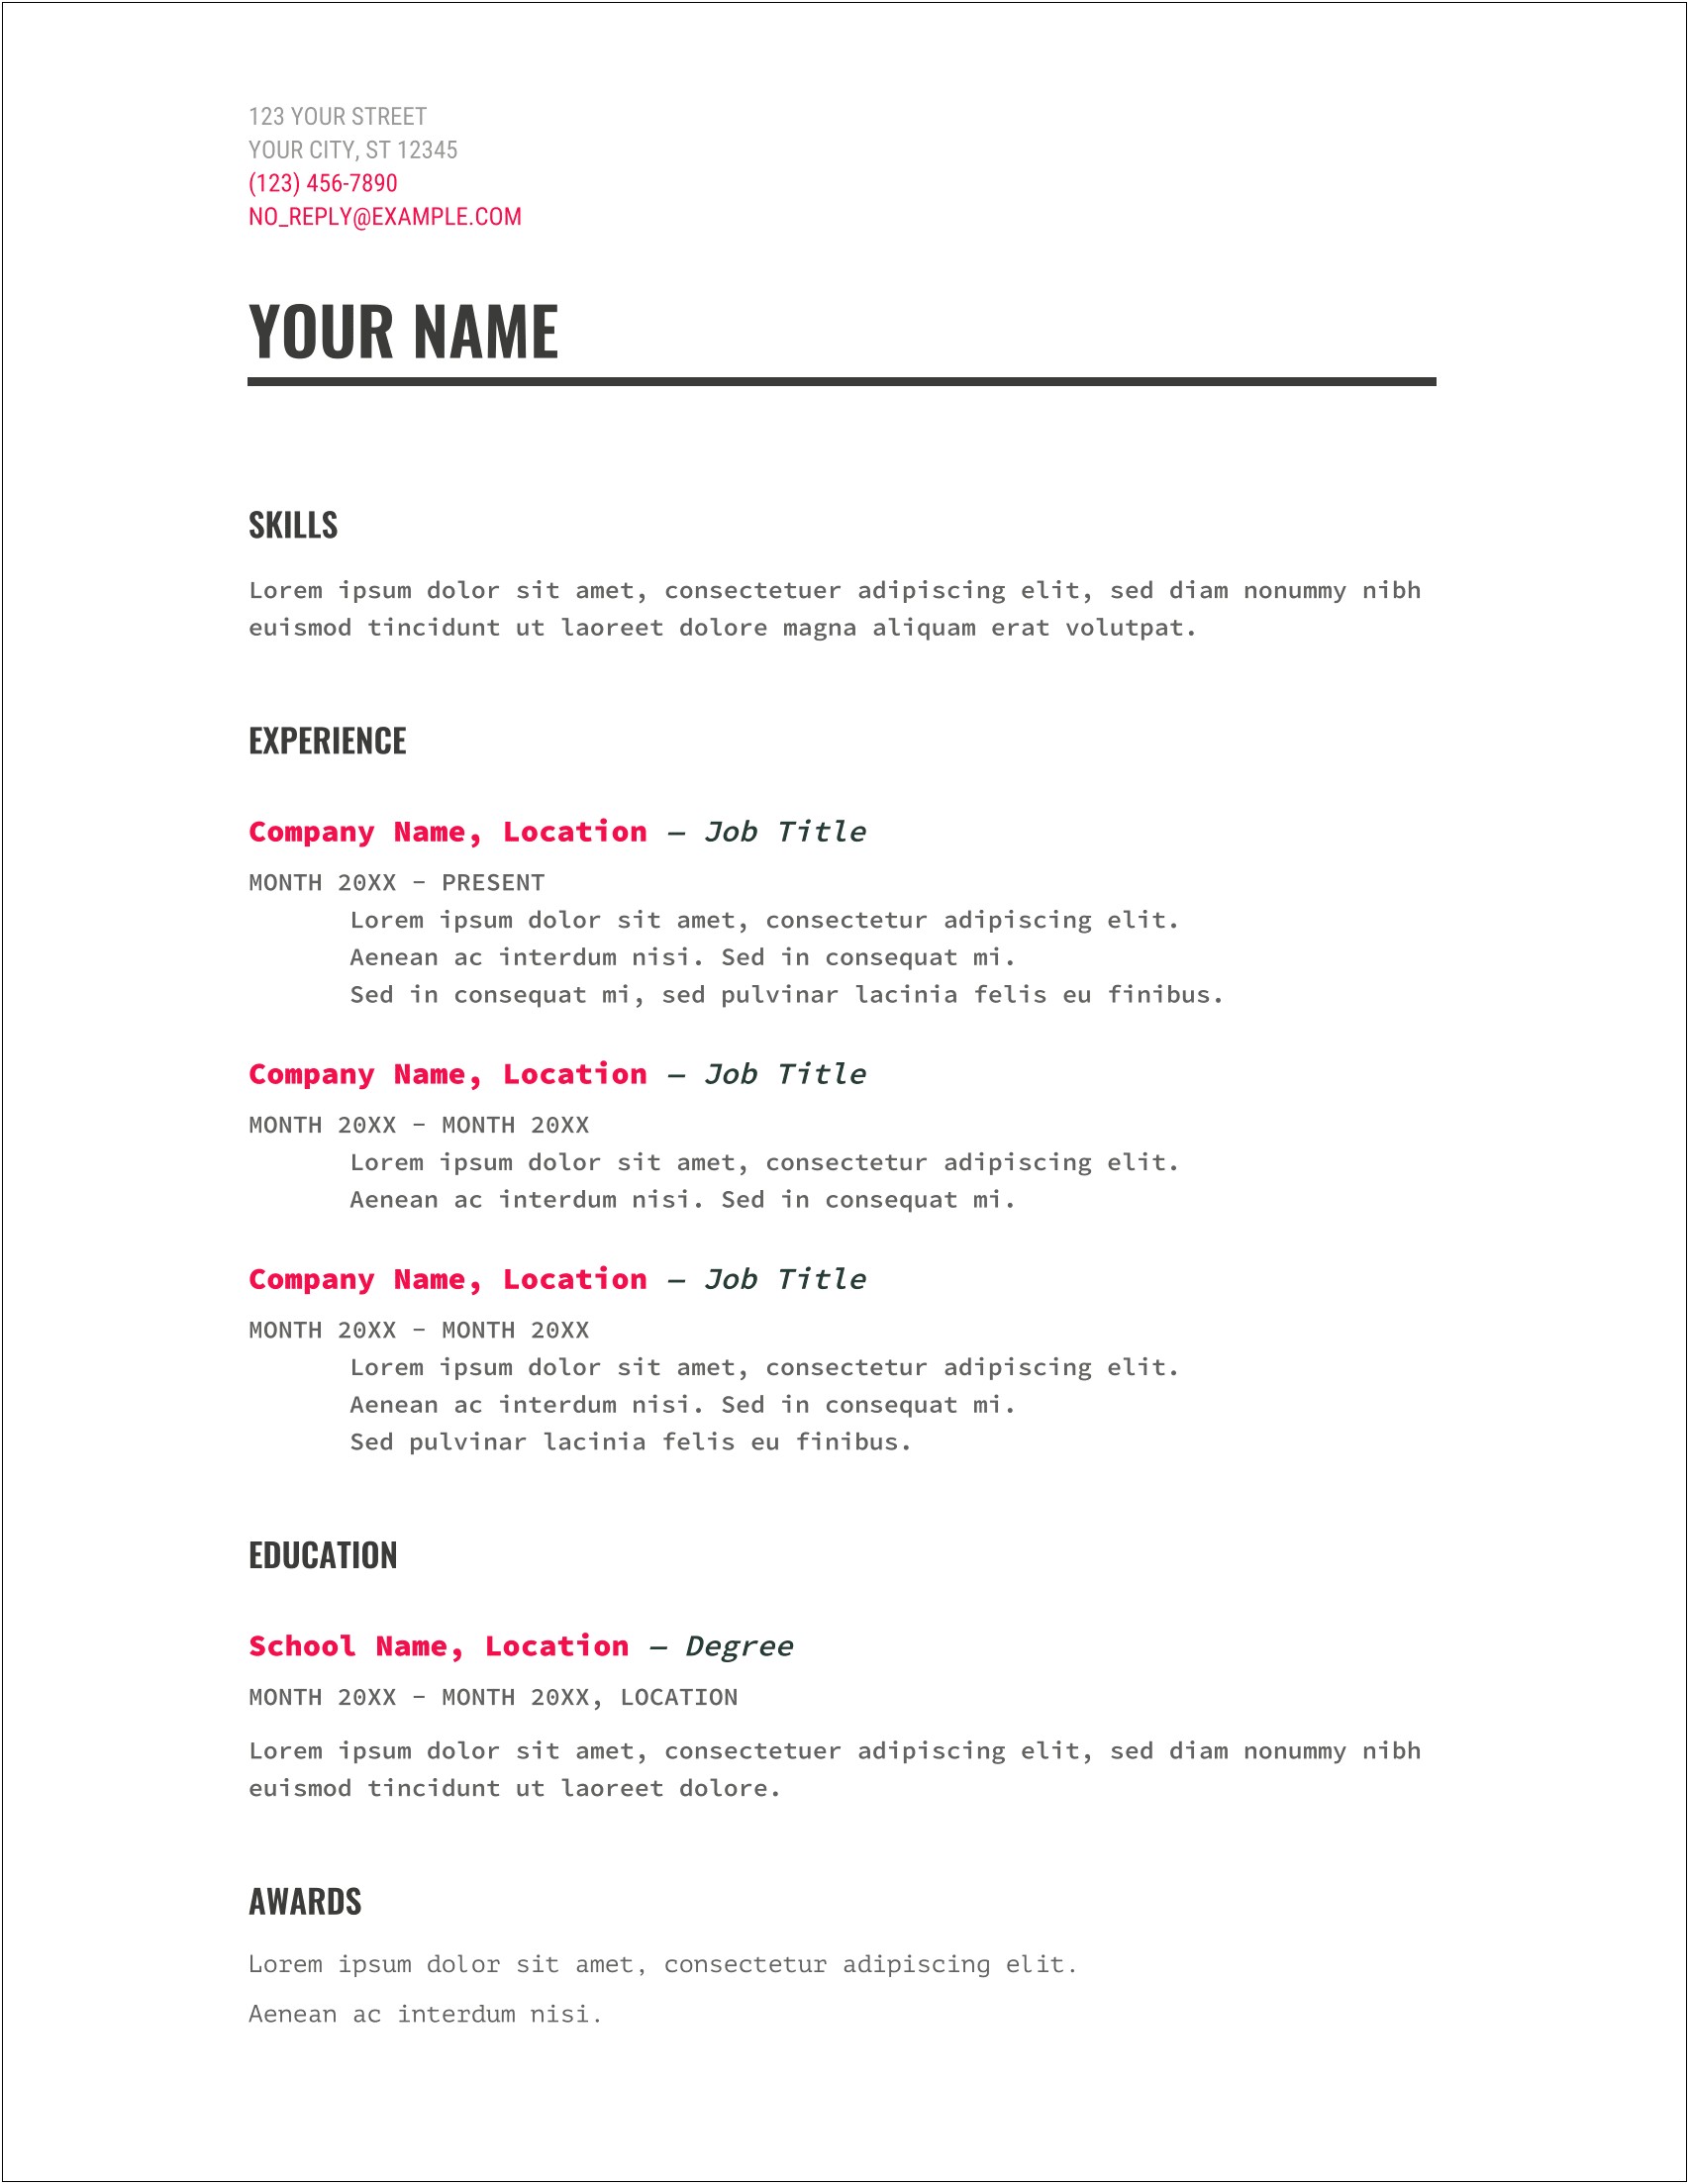 Example Of A Filled Out Google Doc Resume